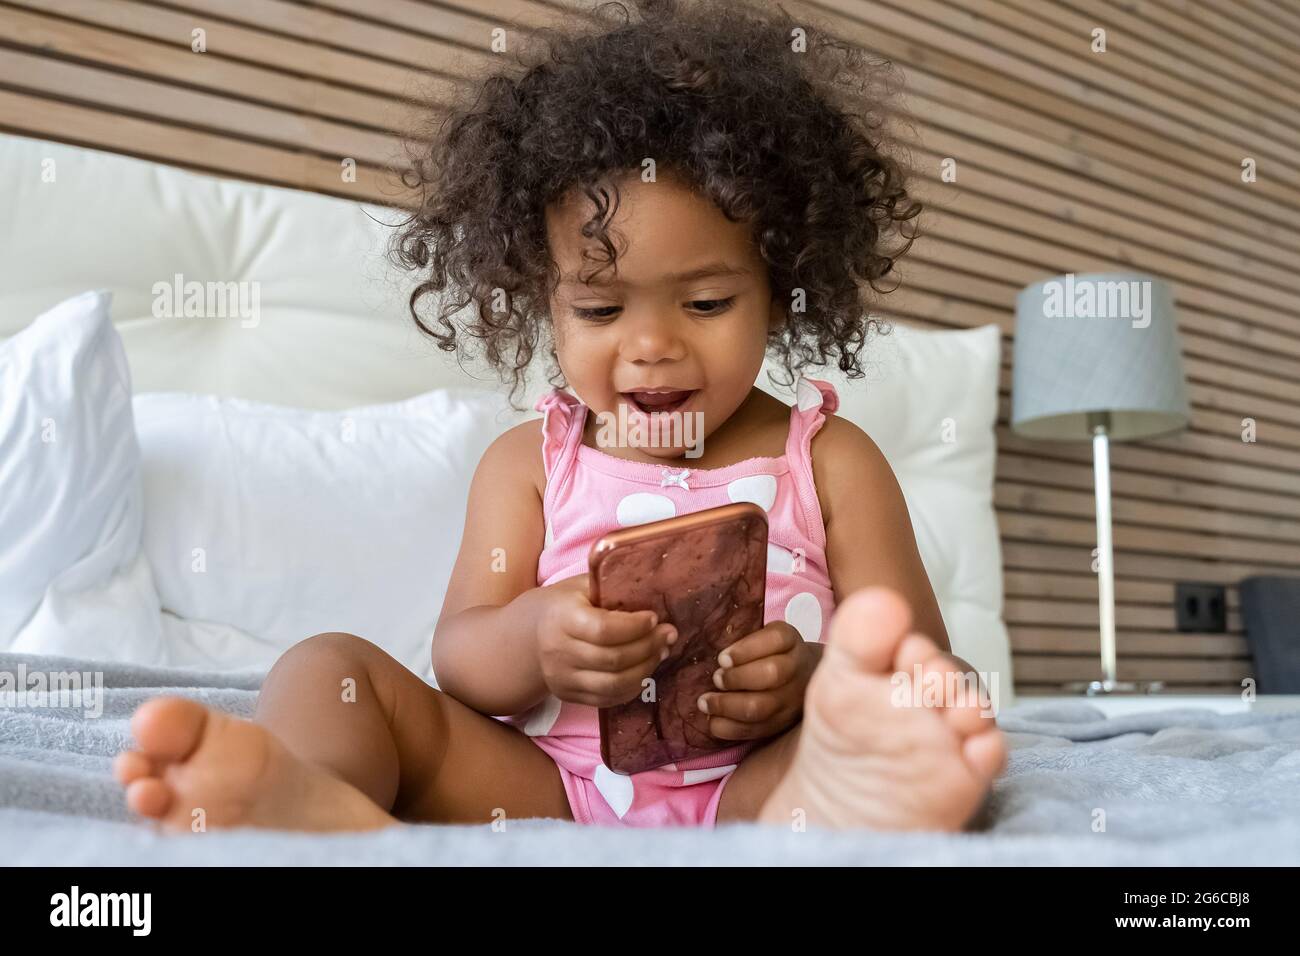 Surprised smiling girl child using smart phone sitting on bed in bedroom Stock Photo